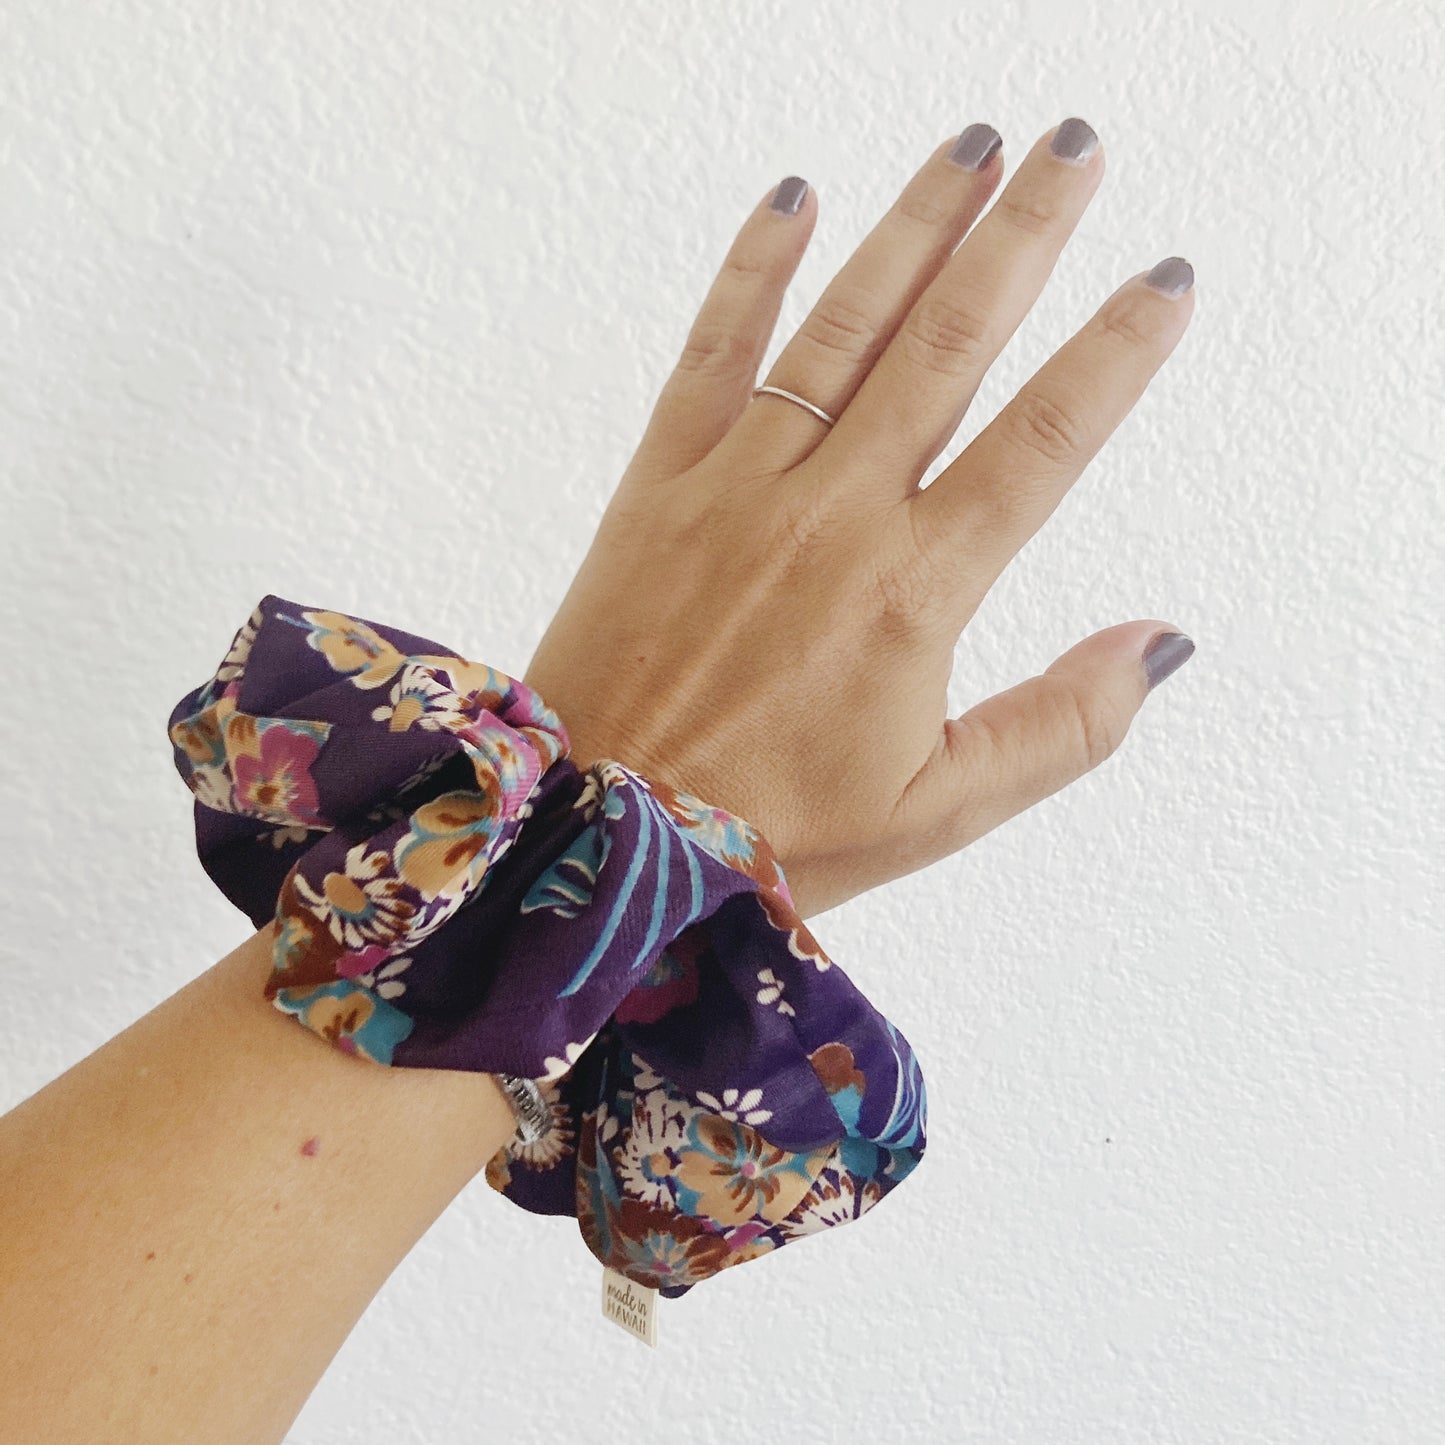 Hana Hou // SCRUNCHIE 006 // Made in Hawaii with upcycled textiles